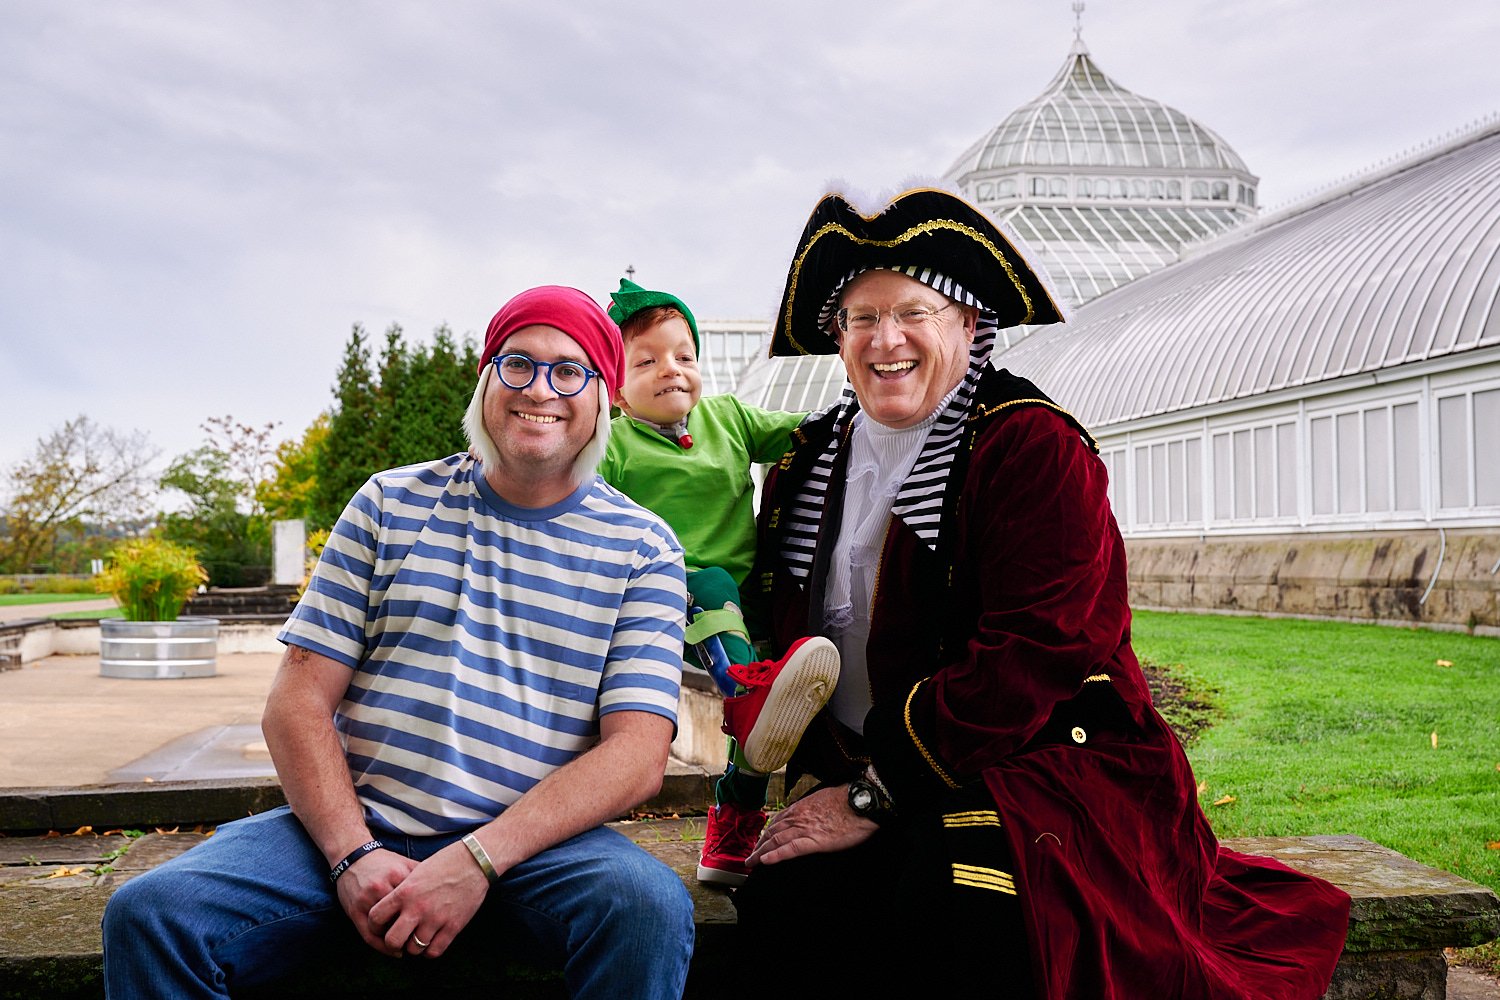  Michaela Robbins is posing with her husband, son and parents in front of Phipps Conservatory and Botanical Gardens of Pittsburgh, PA. The family is dressed in Peter Pan costumes - Tinker Bell, Pirate. 